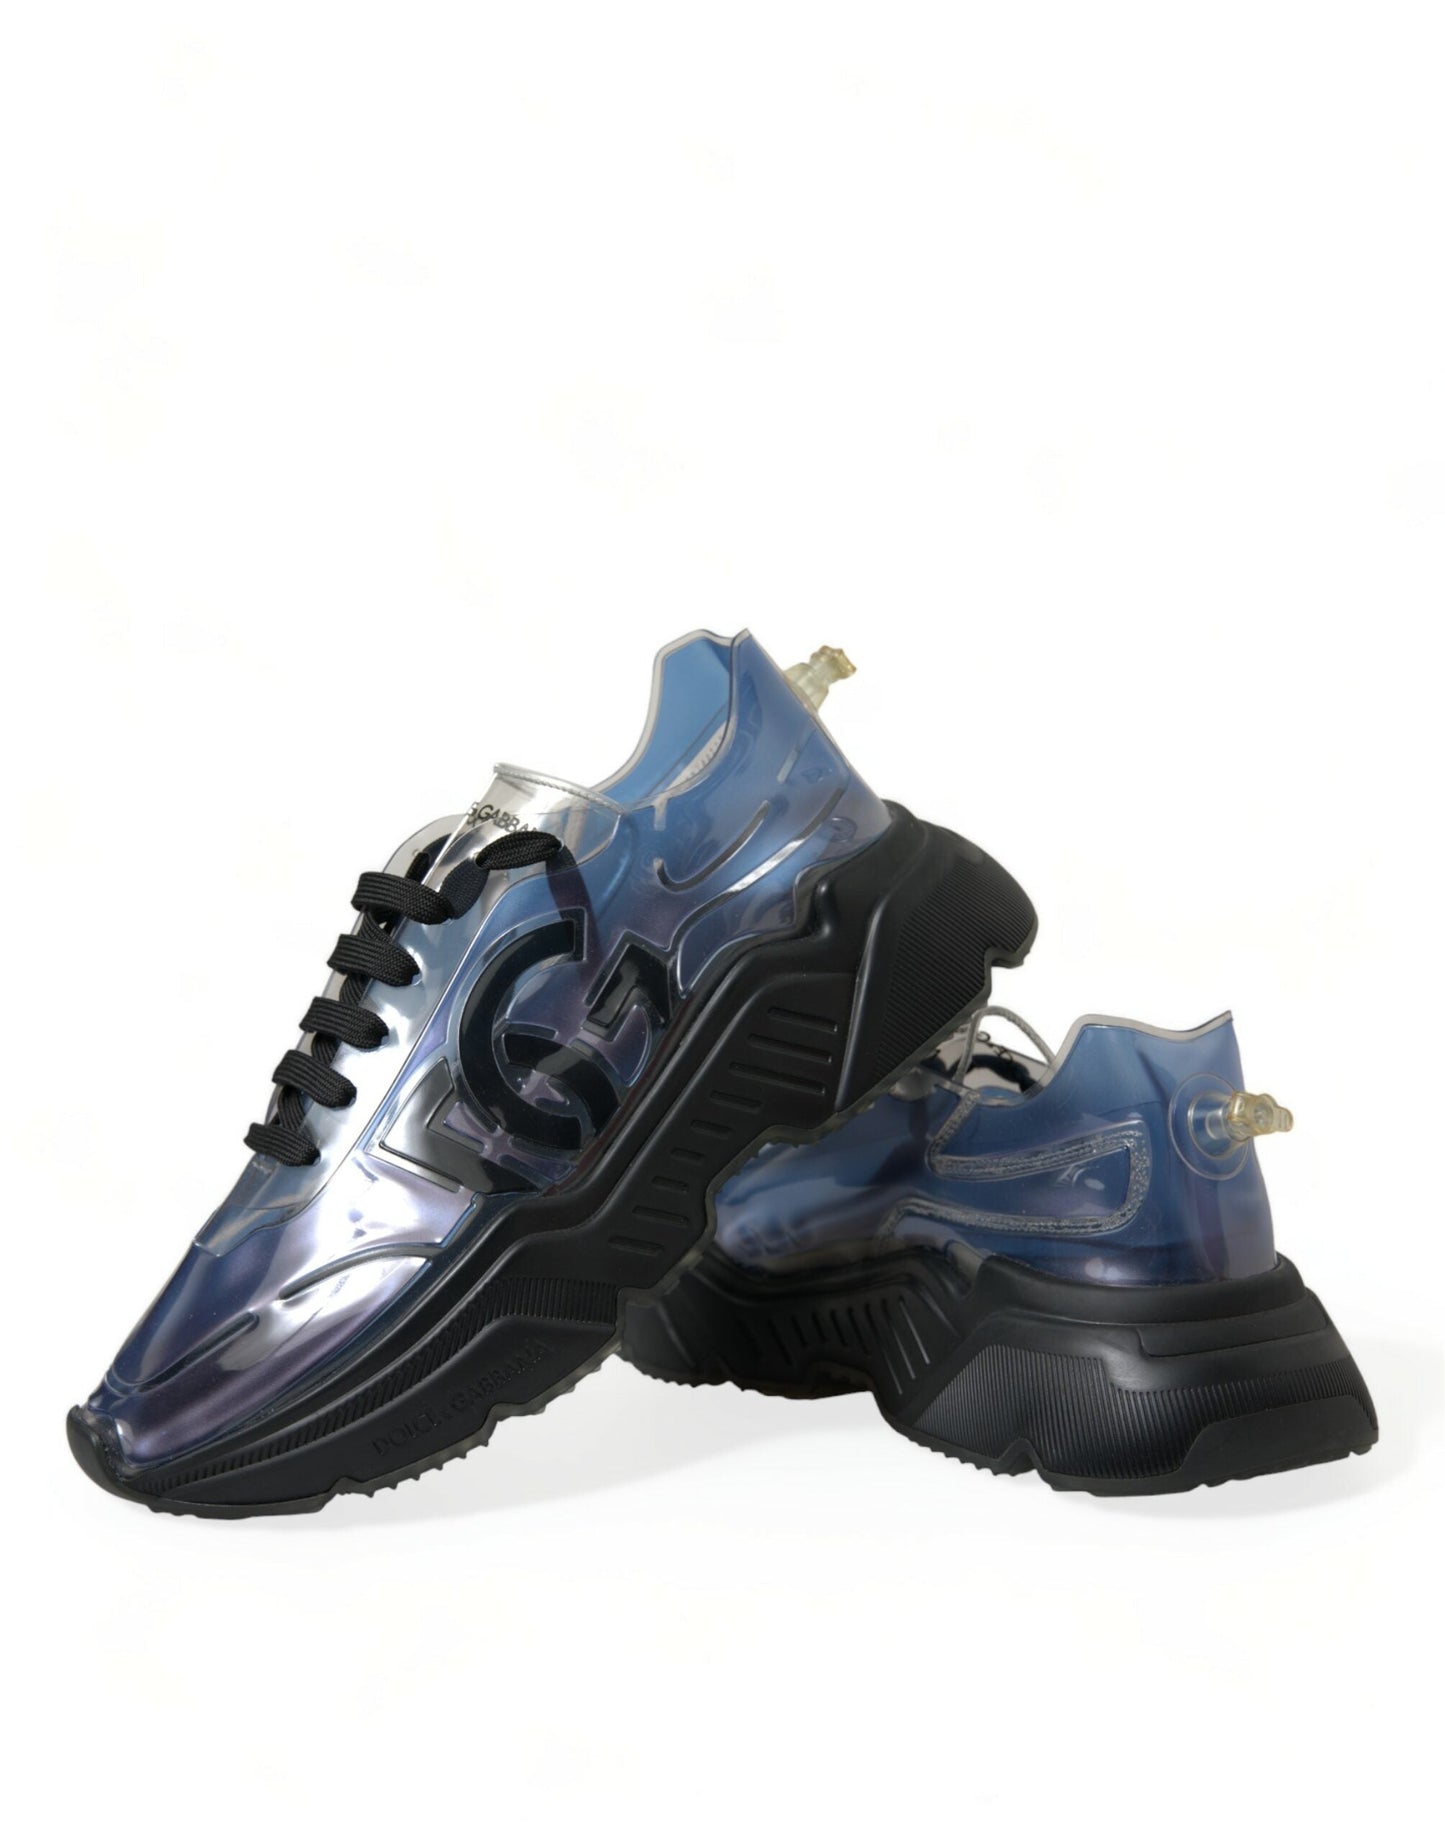 Dolce & Gabbana Elevate Your Style with Chic Blue Sneakers | Fashionsarah.com